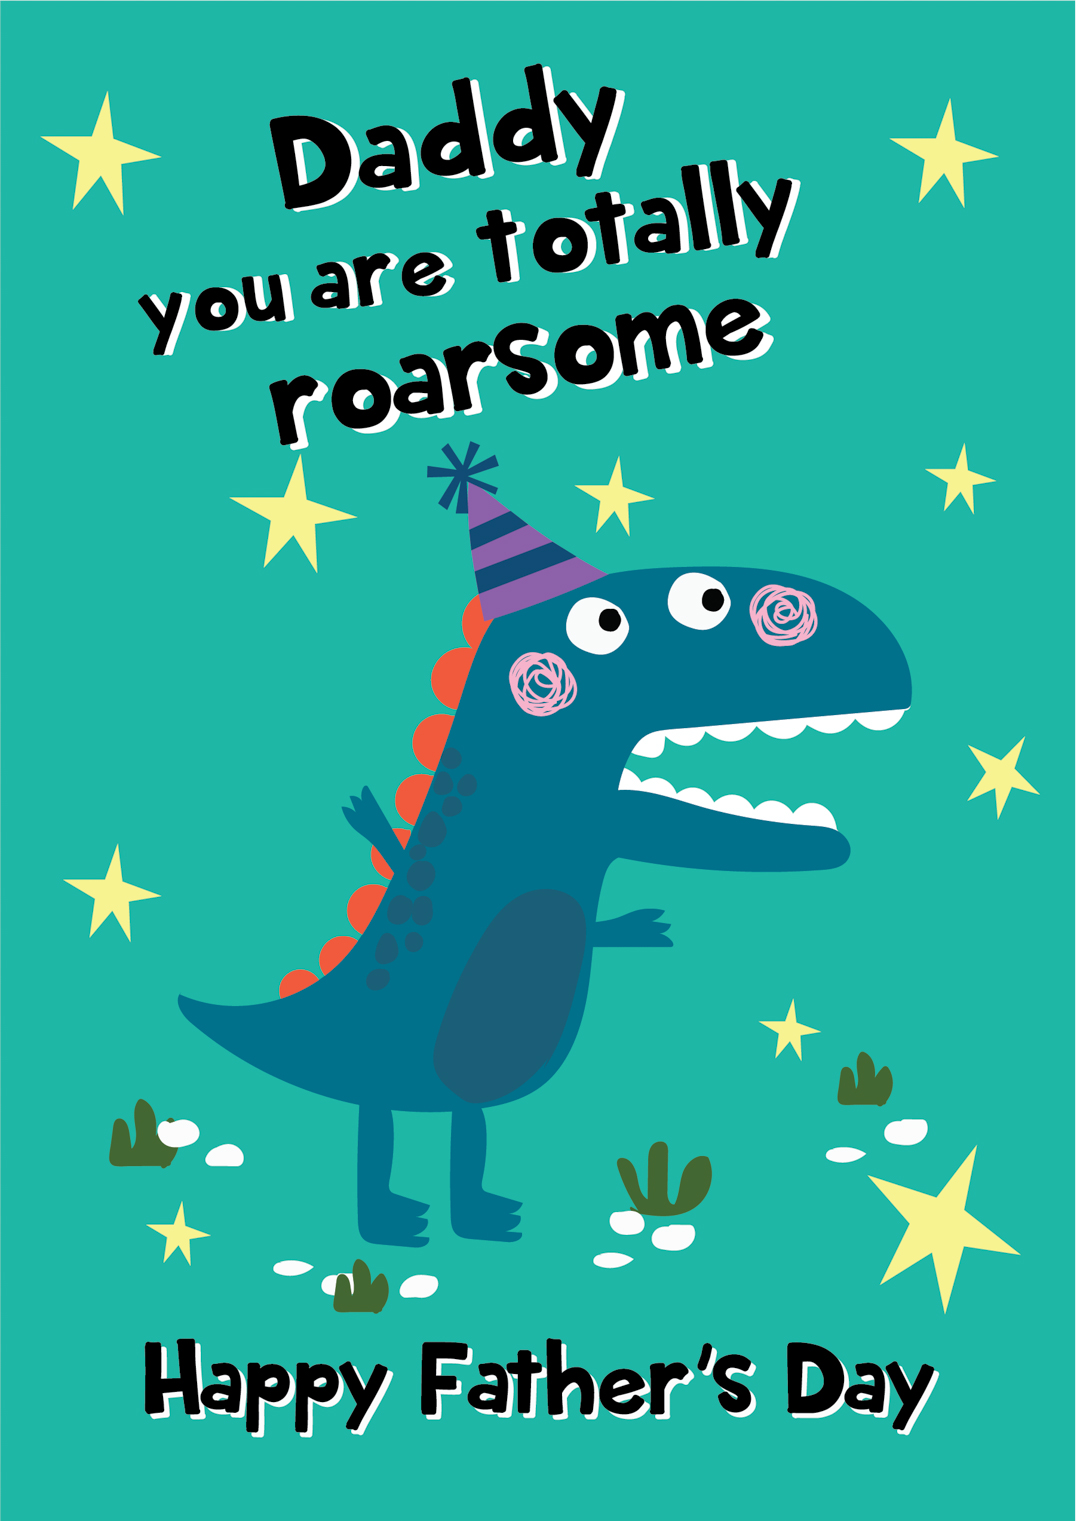 You are totally roarsome!